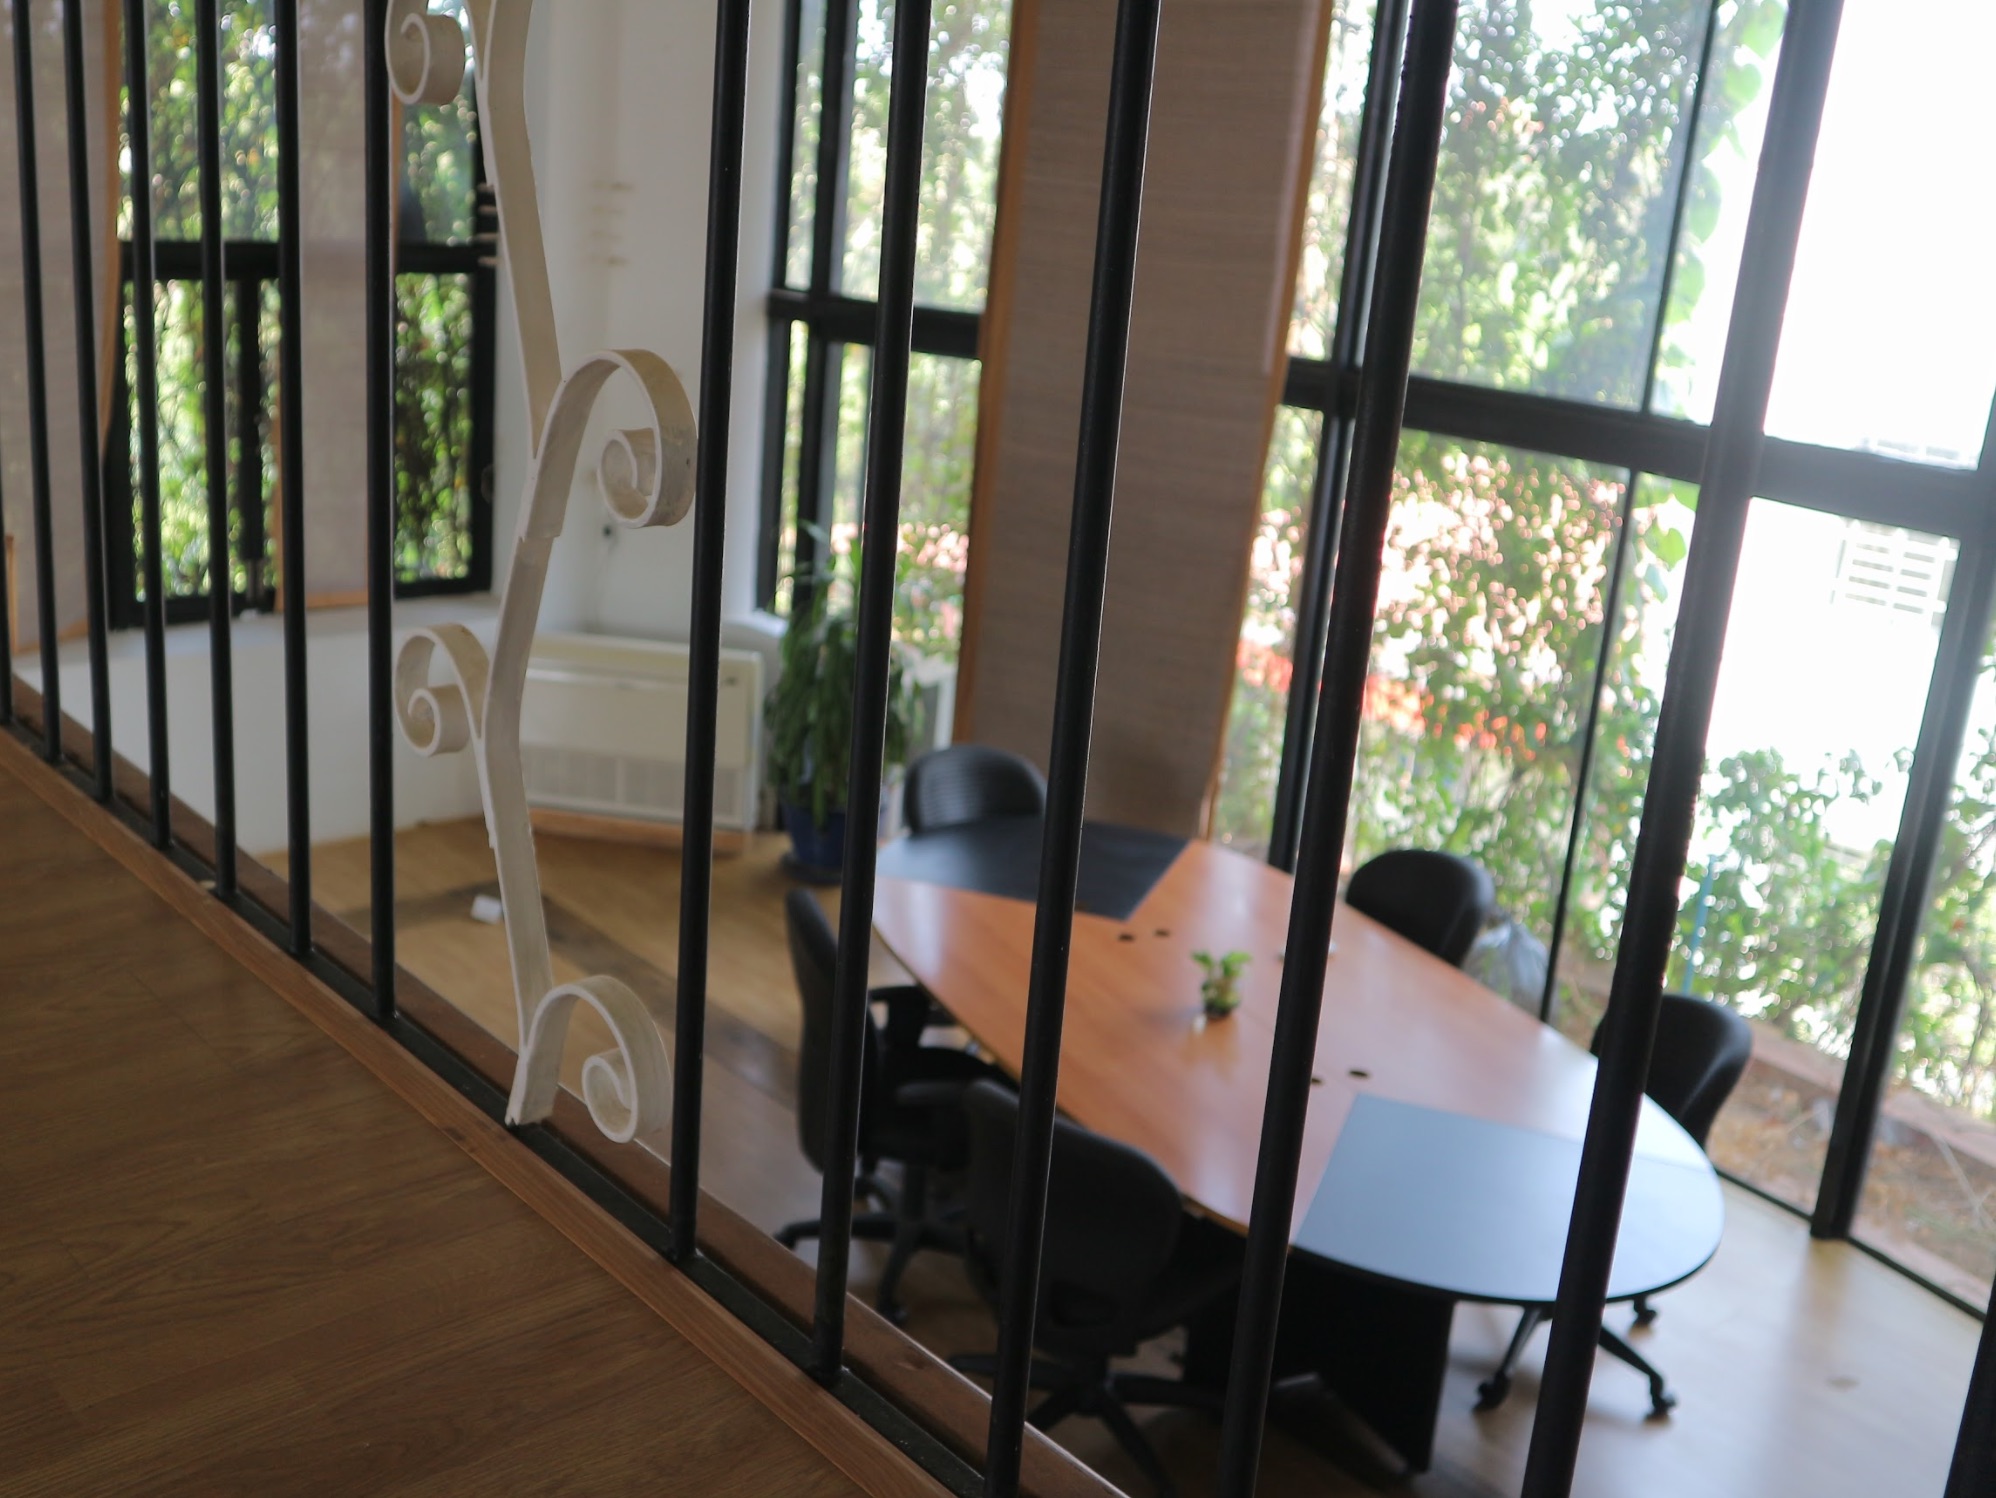 Modern Office Space For Rent In Chroy Chongva | Phnom Penh Real Estate